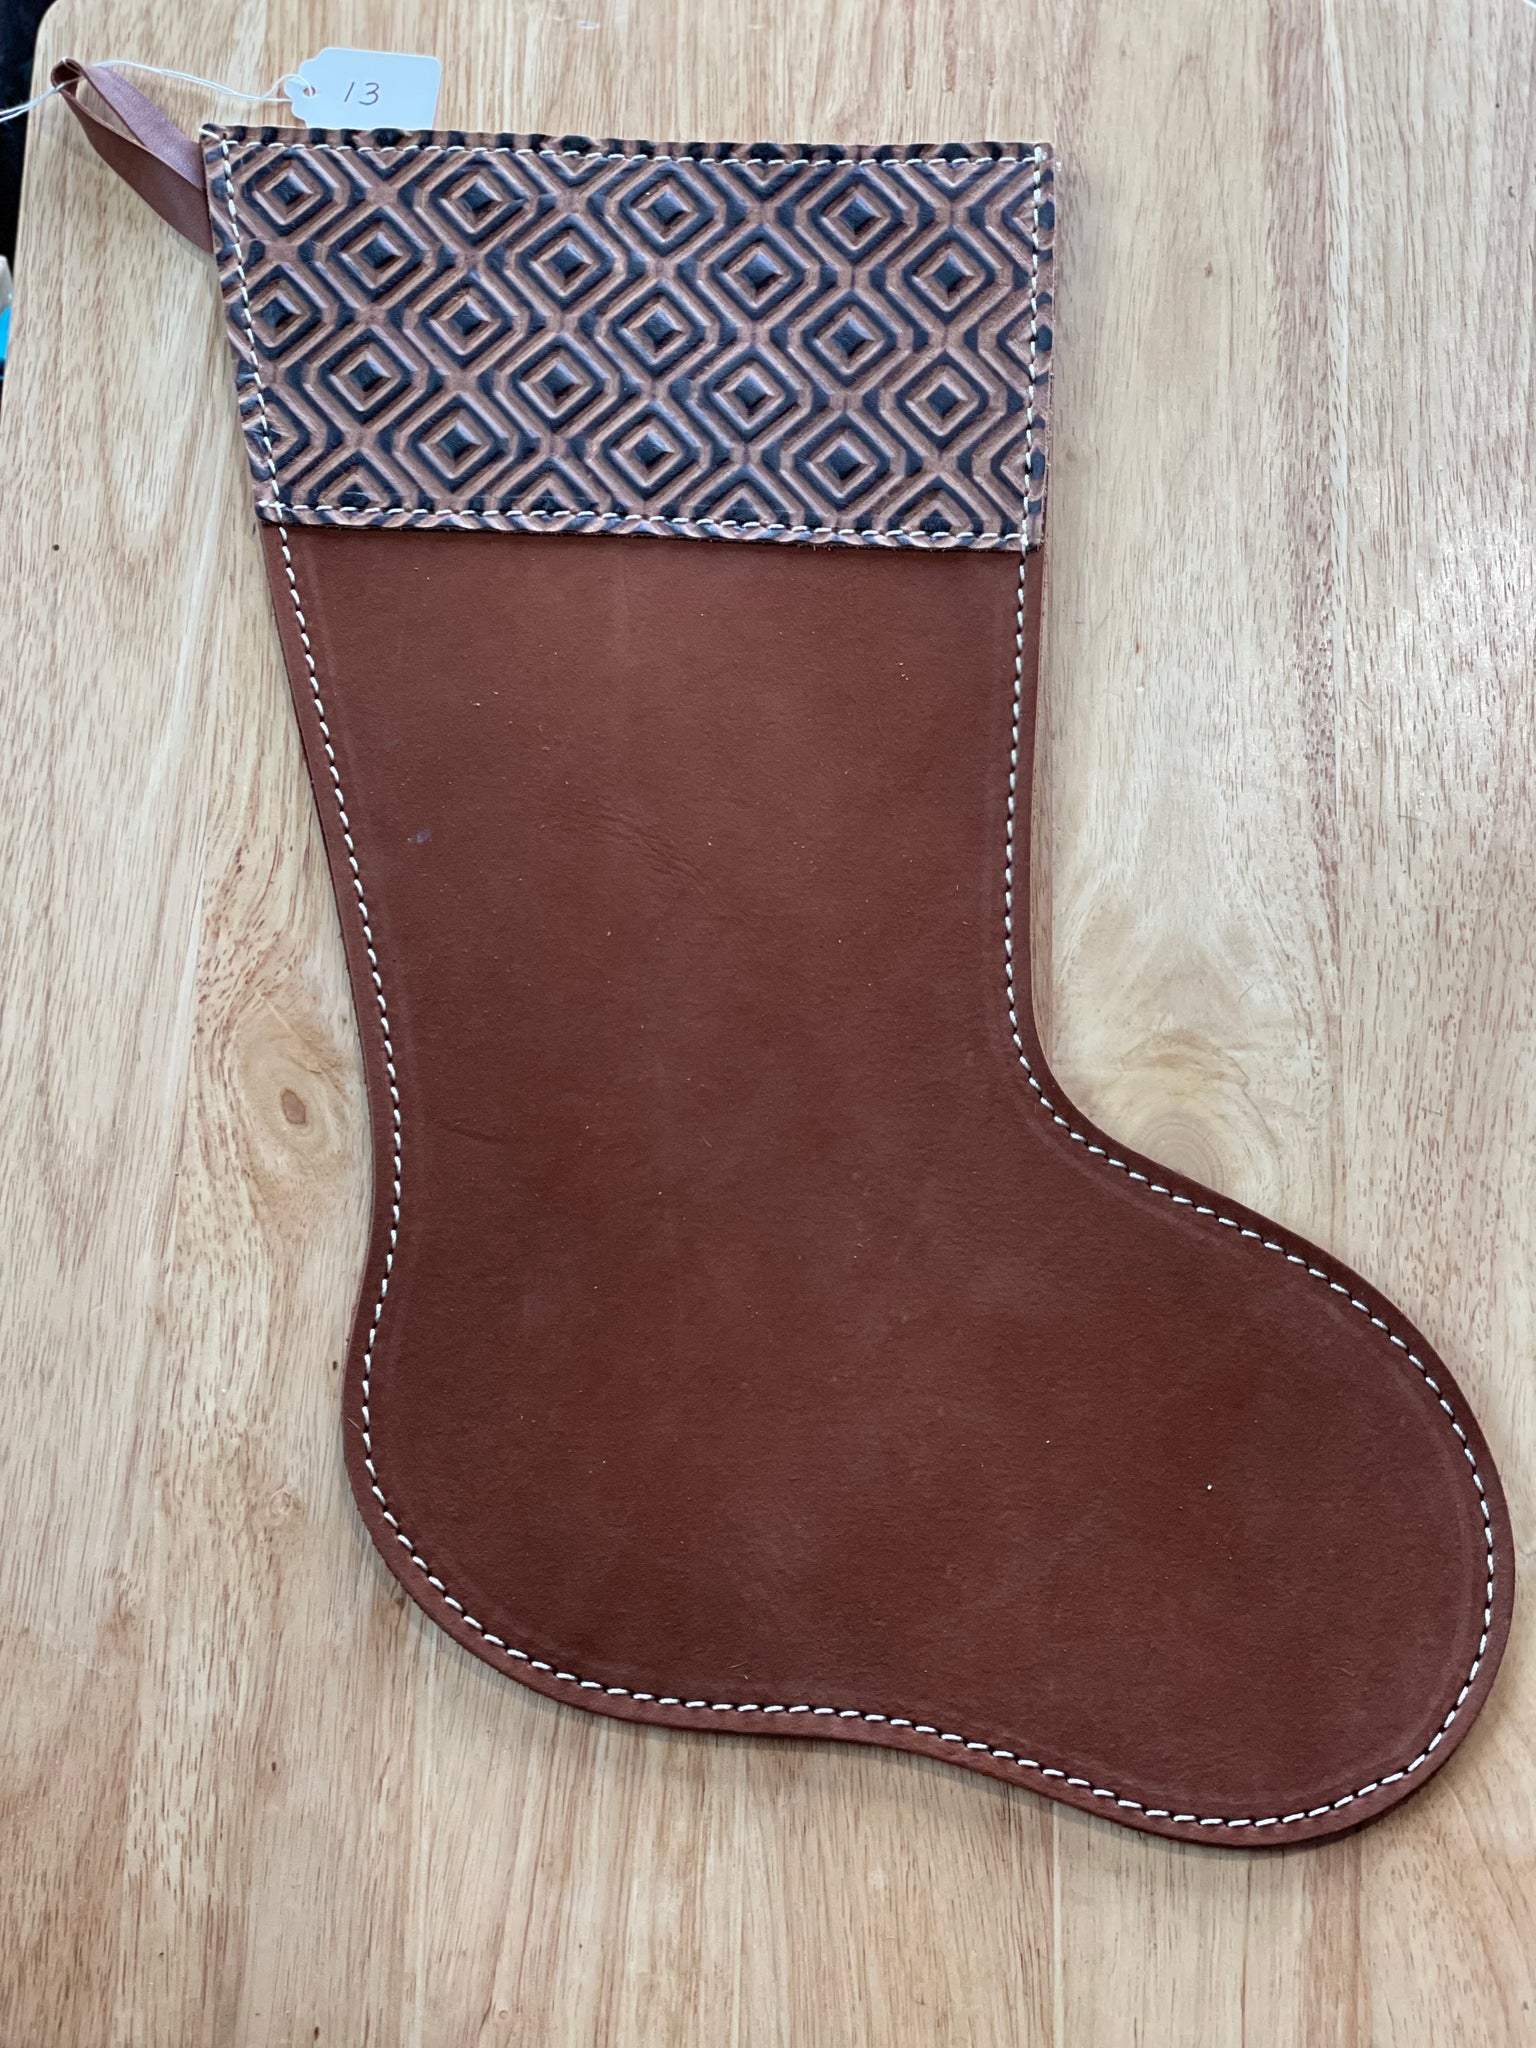 Cowhide and Leather Christmas Stocking #13